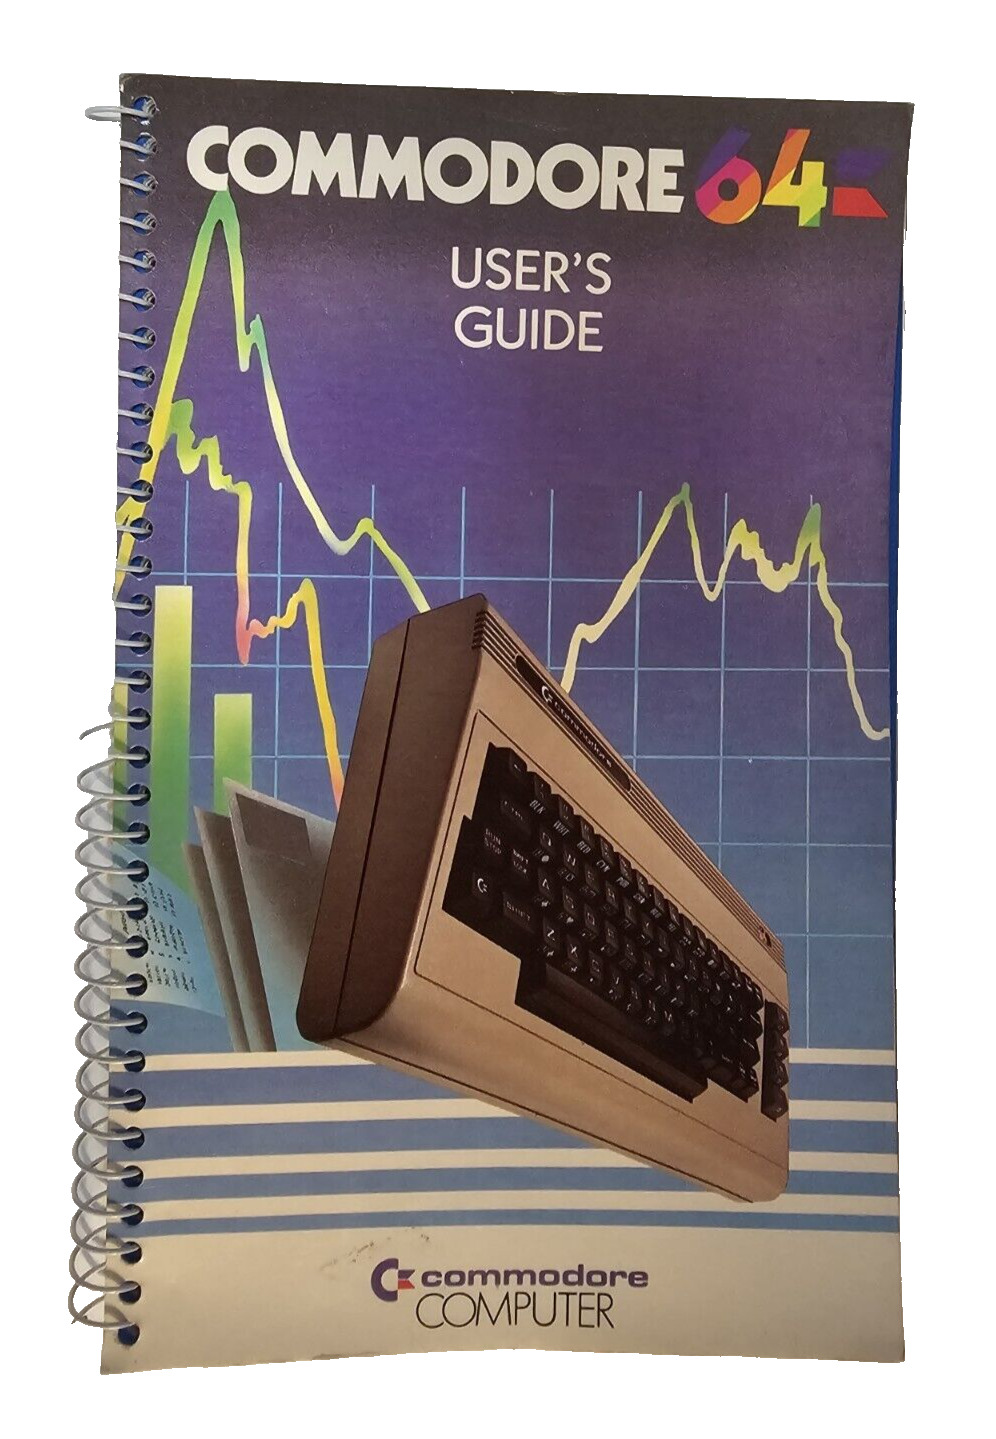 Commodore 64 User's Guide Book (1st Edition - 8th Printing, 1984)